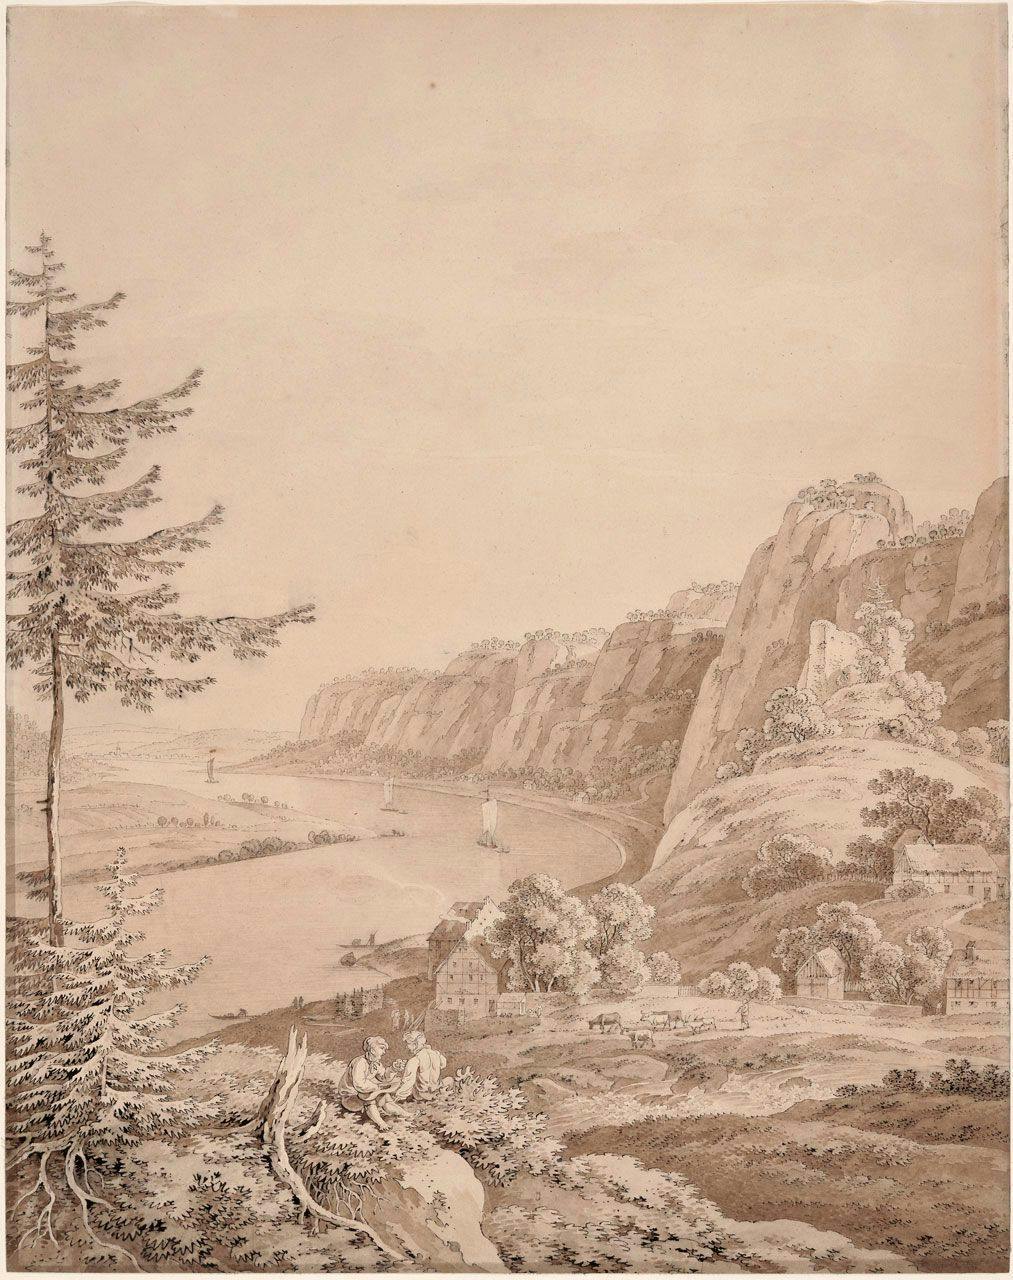 A View of the Elbe River and the Bastei Rocks in the Sächsische Schweiz, Saxony
Adrian  Zingg 
18th Century,19th Century
2006.12